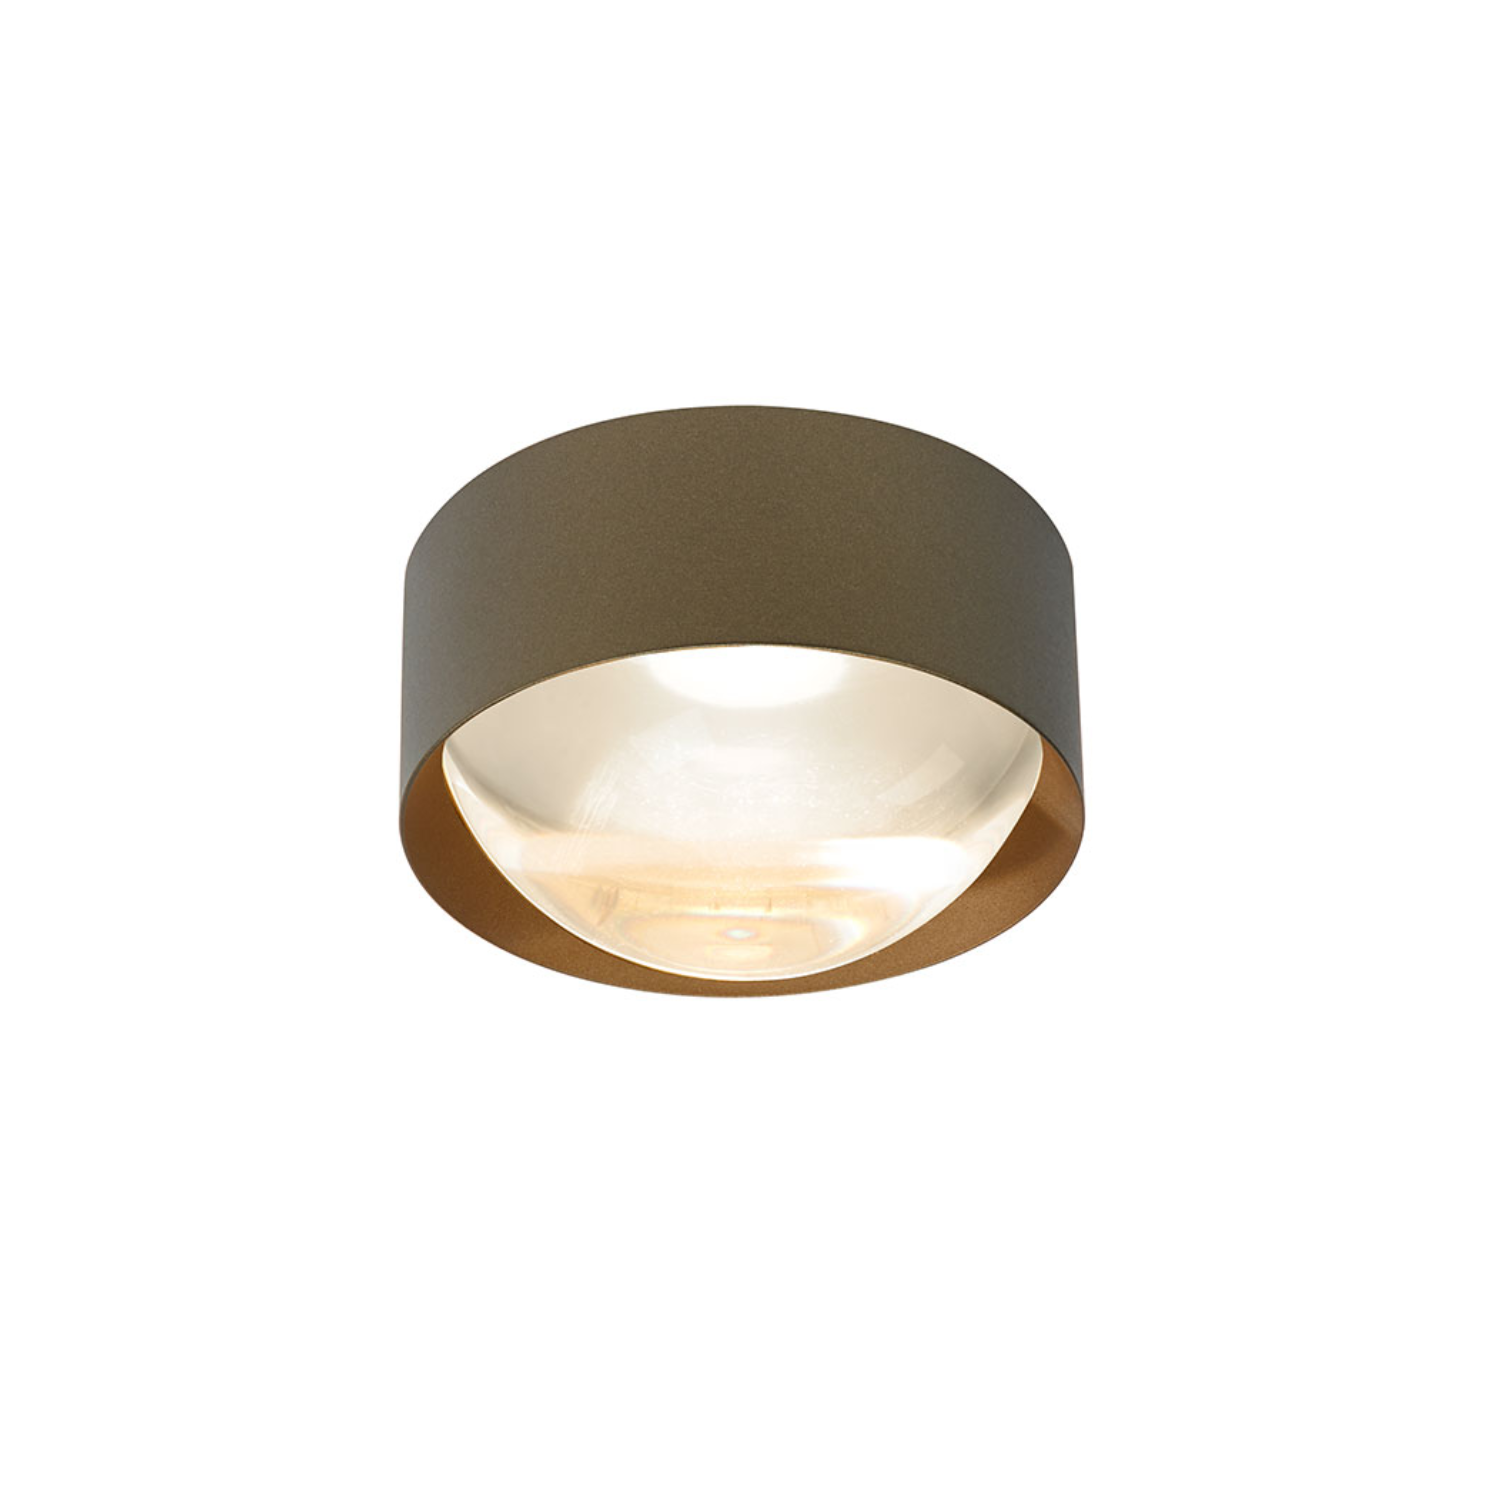 BILY 16 OUT - Ceiling Light